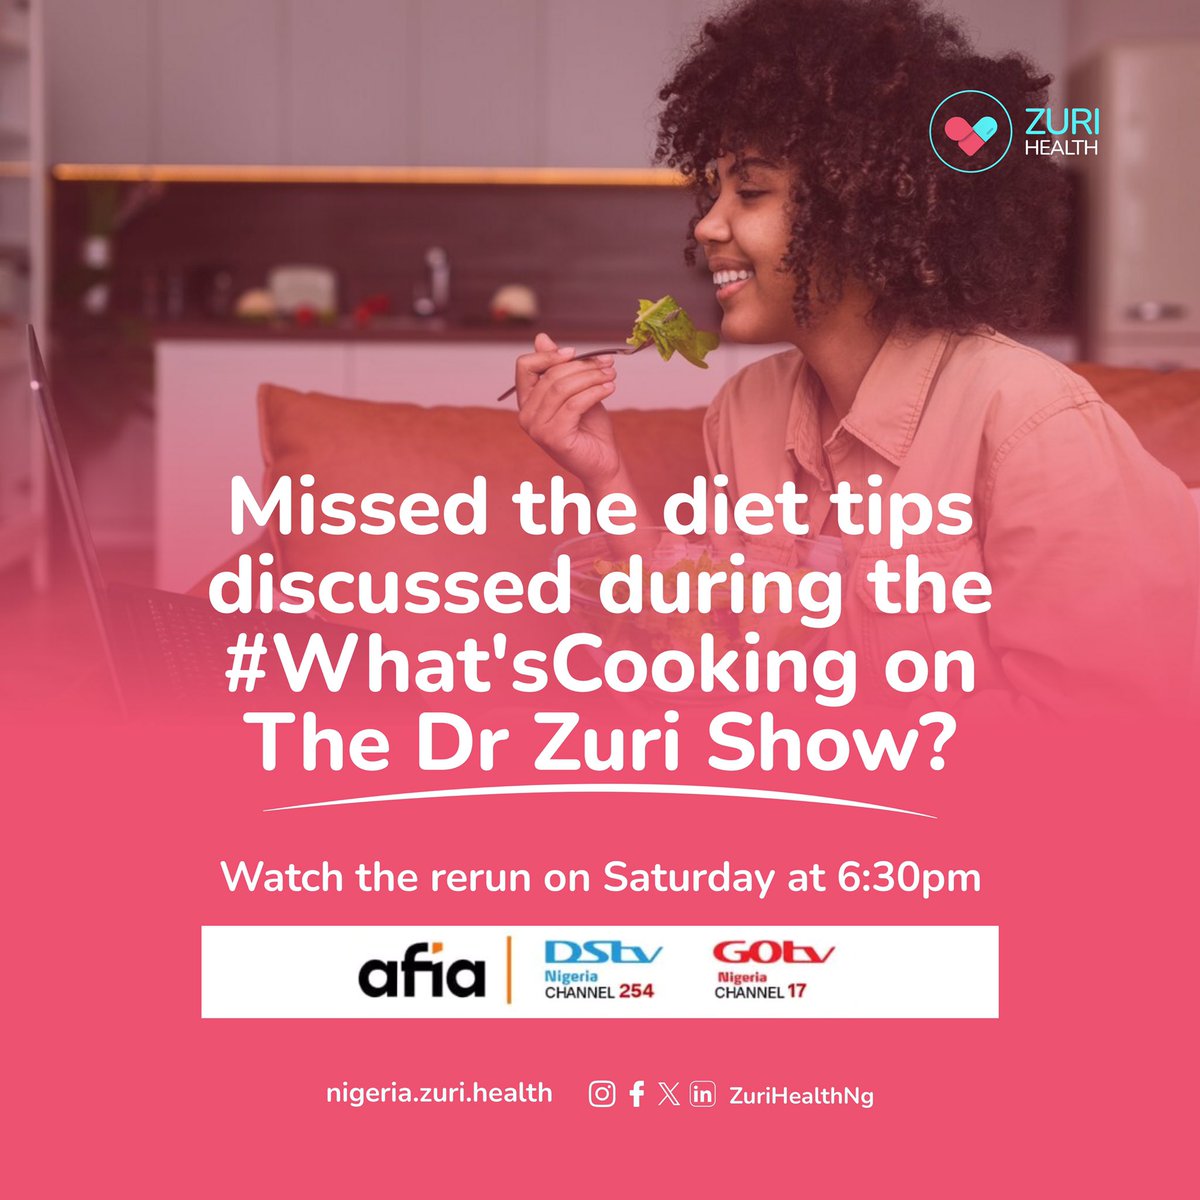 Did you miss last night’s episode of #drzurishow ? Well , here’s your chance to catch up #zurihealth #nigeria #nigerianfood #health #healthylifestyle #instadaily #doctor